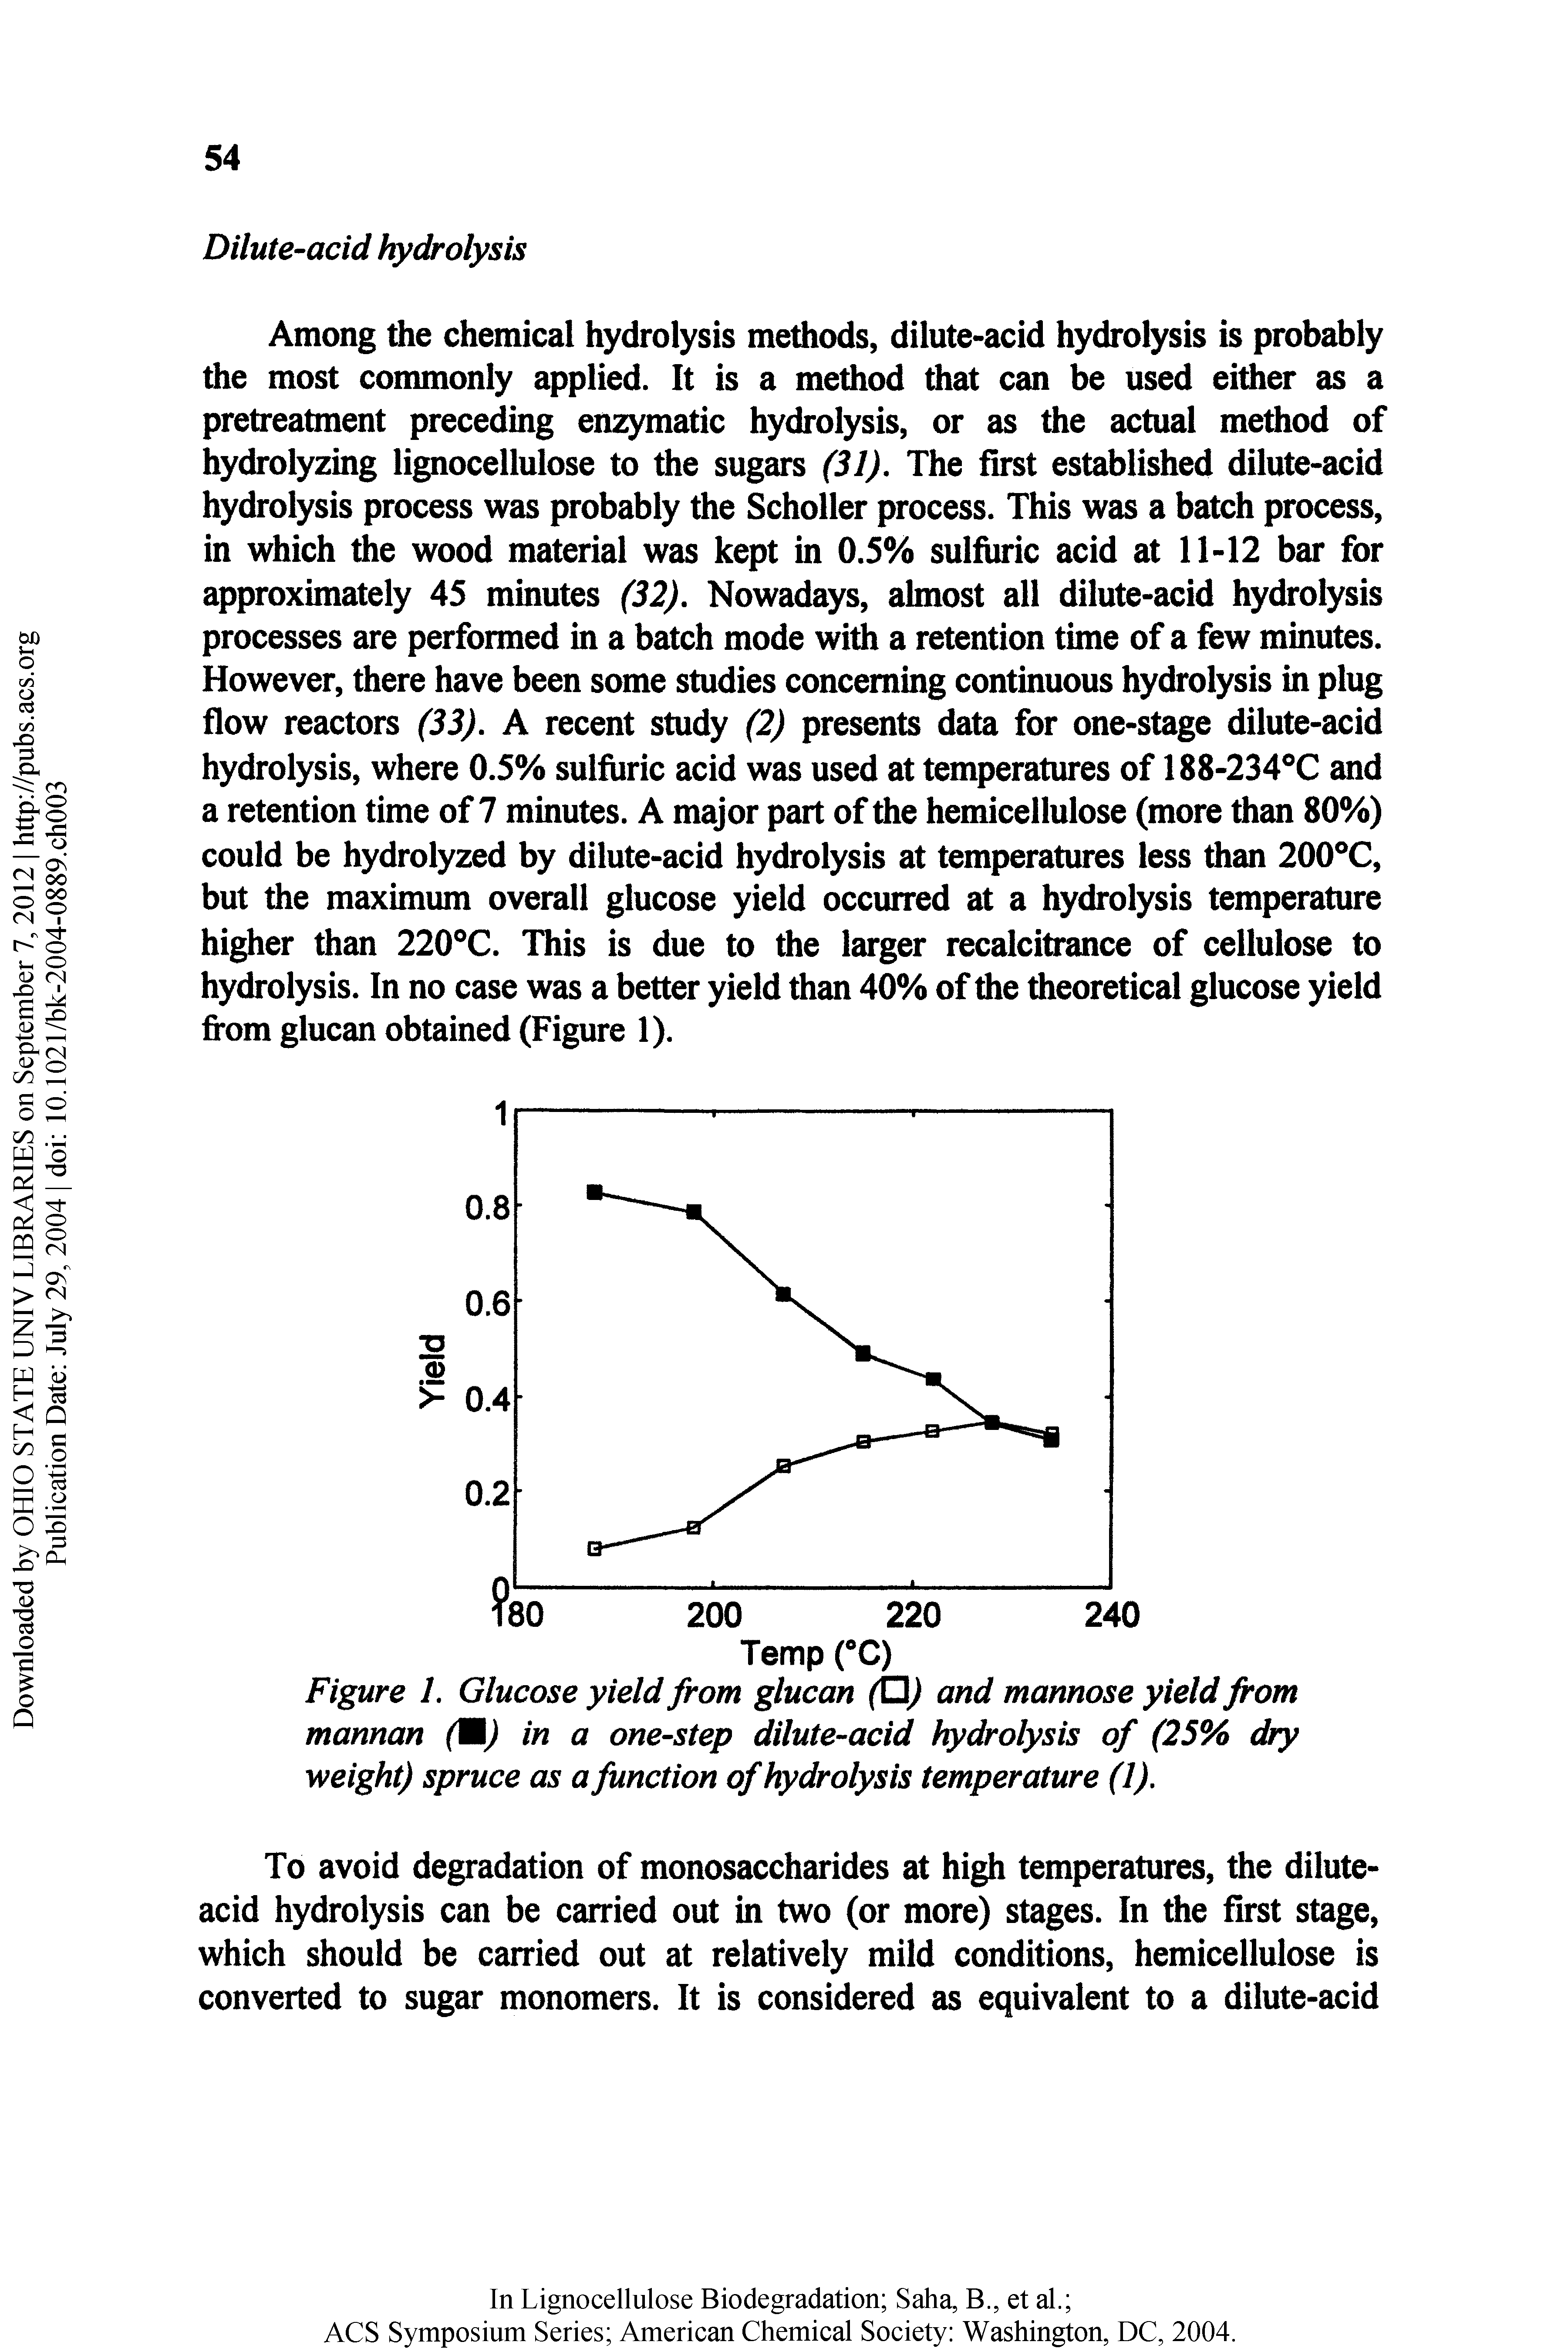 Figure 1. Glucose yield from glucan ) and mannose yield from mannan ( in a one-step dilute-acid hydrolysis of (25% dry weight) spruce as a junction of hydrolysis temperature (1).